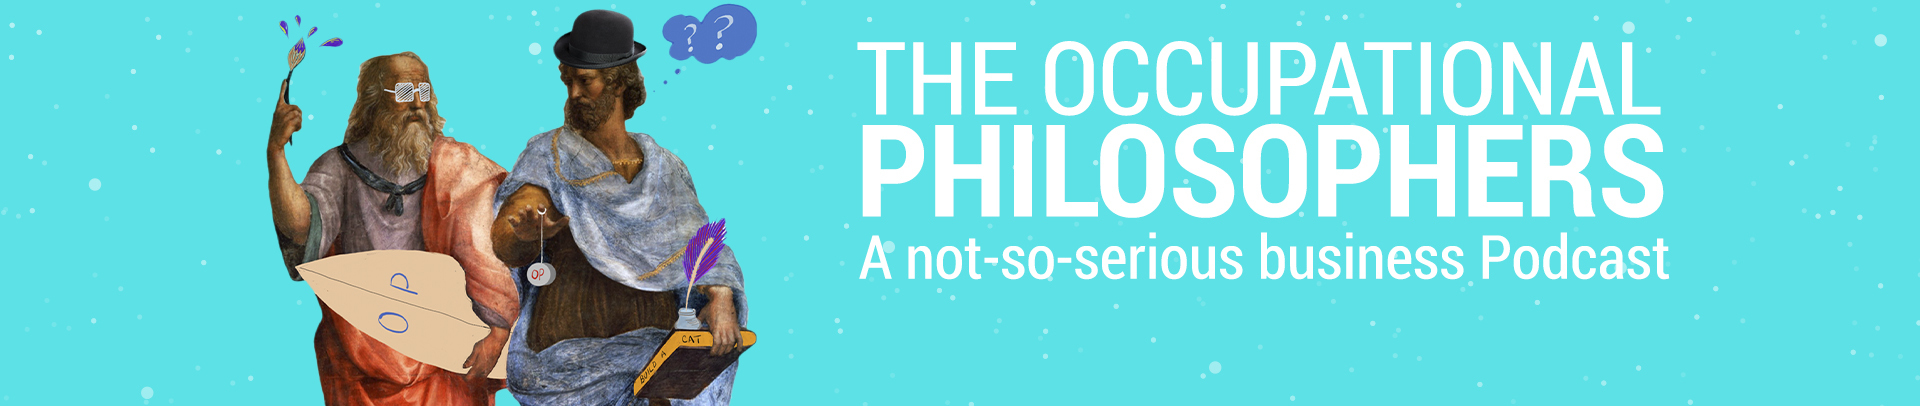 The Occupational Philosophers - A not-so-serious business podcast to spark Creativity, Imagination and Curiosity